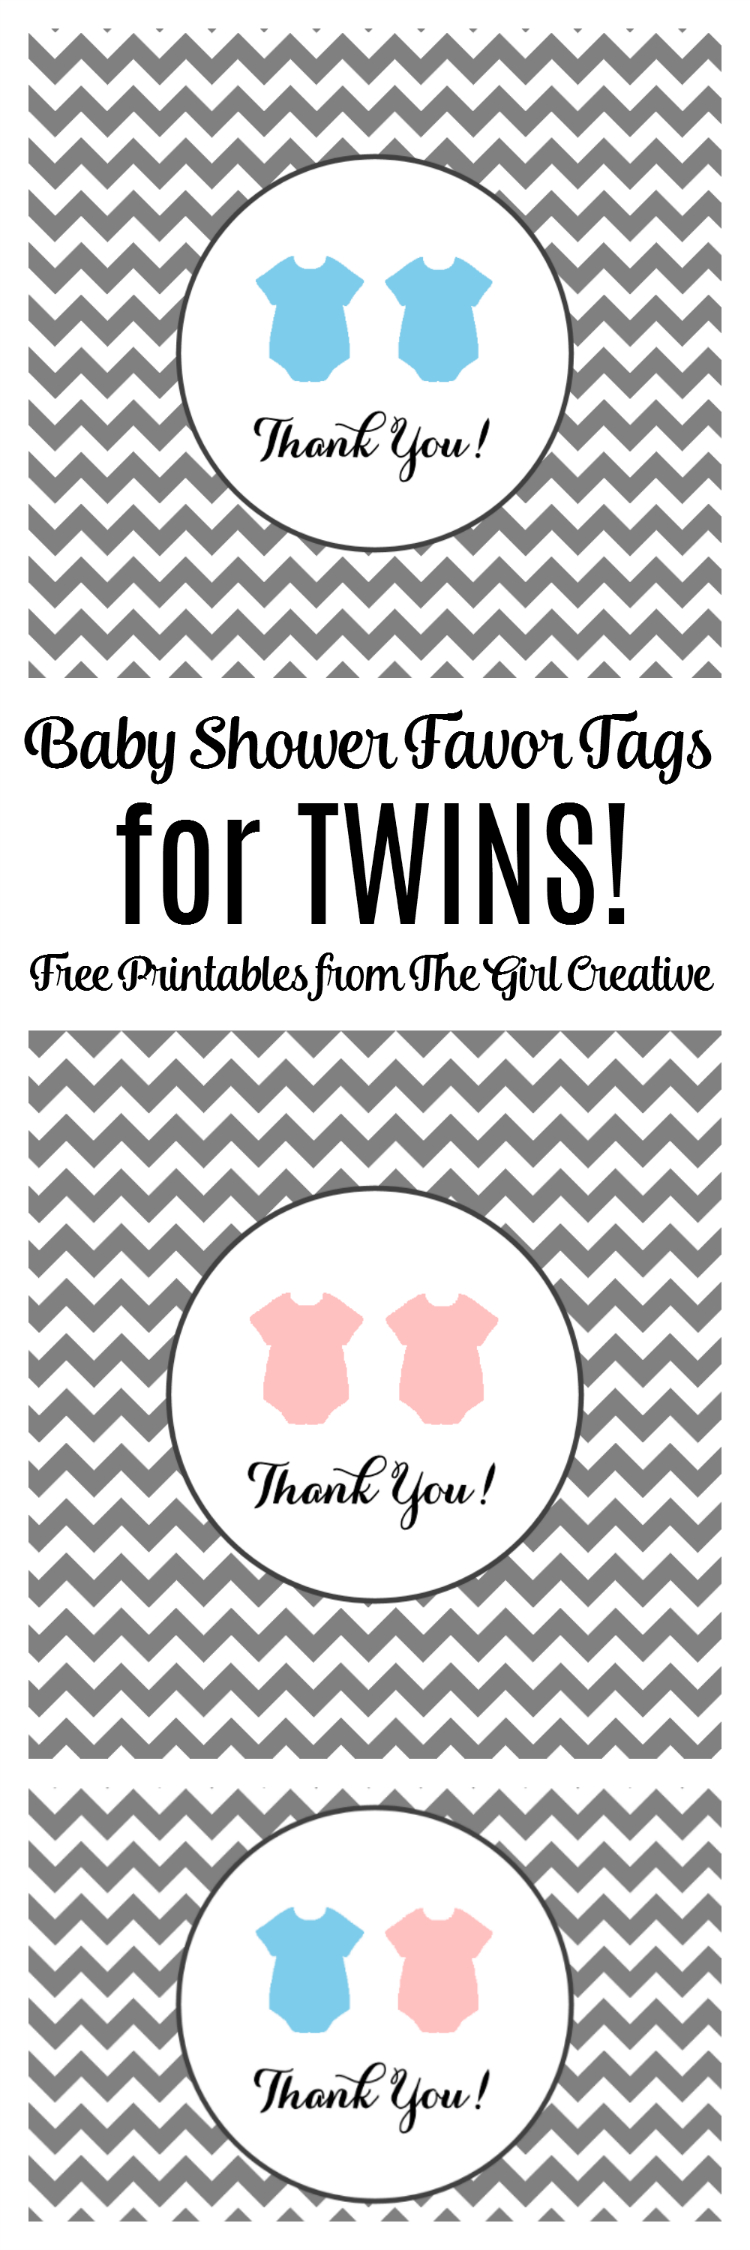 Baby Shower Favor Tags For Twins - The Girl Creative - Free Printable Baby Shower Favor Tags